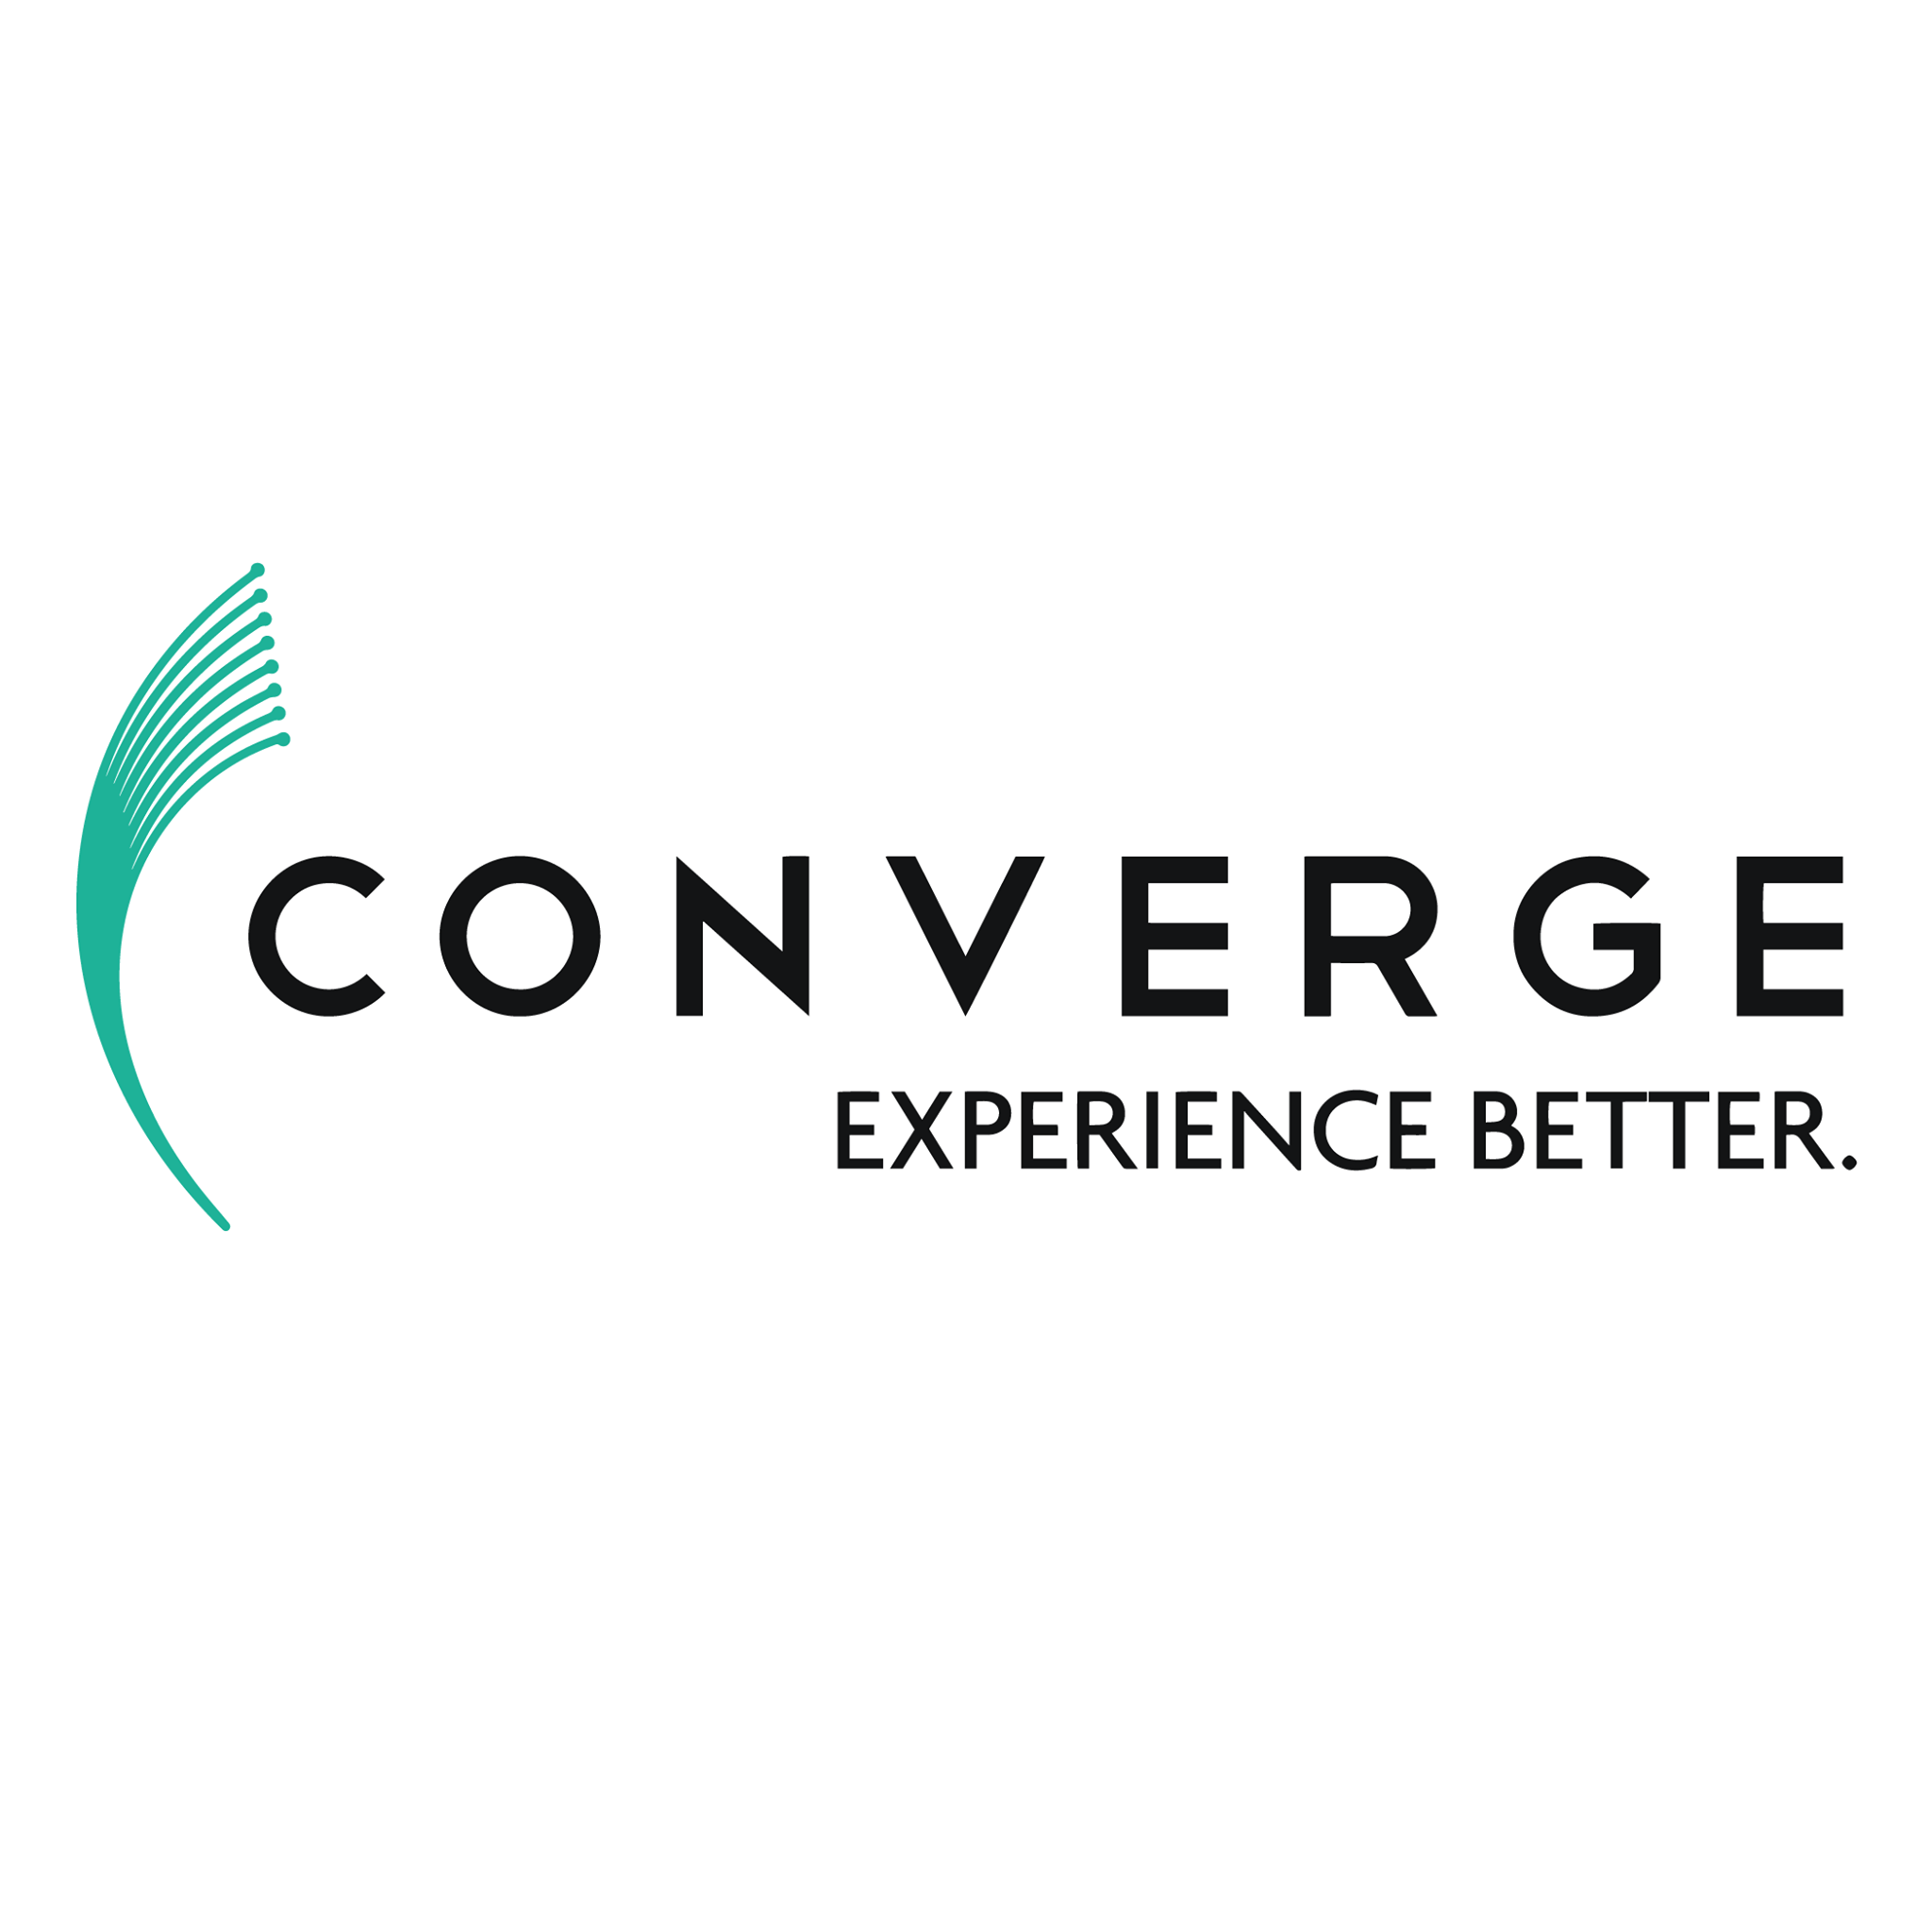 Philippines’ Converge joins 2 global stock indices